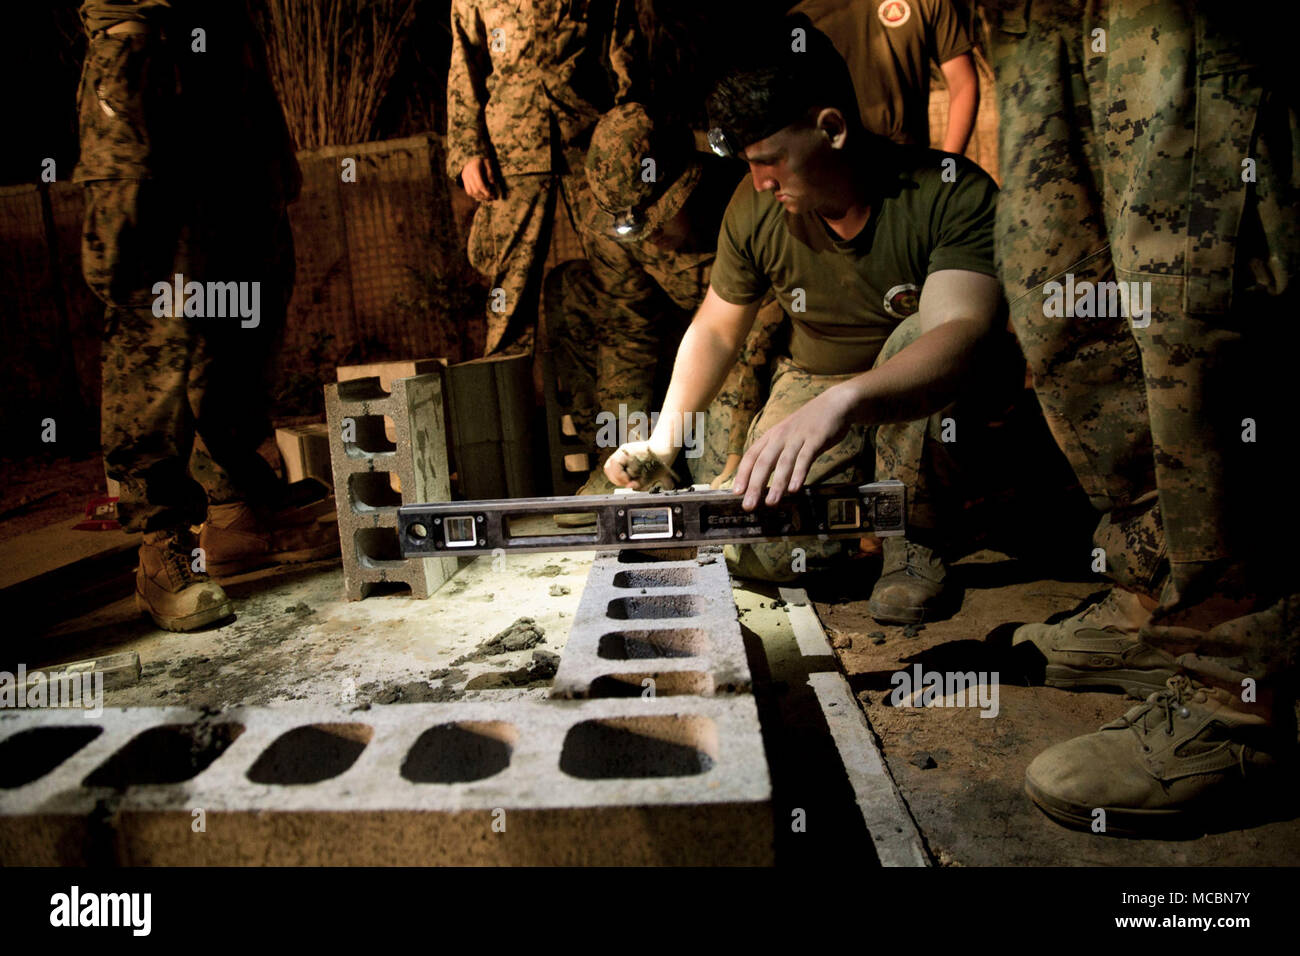 Lance Cpl. Joseph Dickens, a combat engineer with 1st Platoon, A Co. 9th Engineer Support Battalion, 3rd Marine Logistics Group, lays bricks in the late evening March 26, 2018, Camp Hansen, Okinawa, Japan. The Marines stayed out in the field until the construction of an ammunition storage point was completed, using their safety vehicle and head lights to see late into the night. Vertical construction training prepares Marines for similar projects they will be entrusted with during humanitarian assistance operations. Dickens is a native of Beckley, West Virginia. Stock Photo